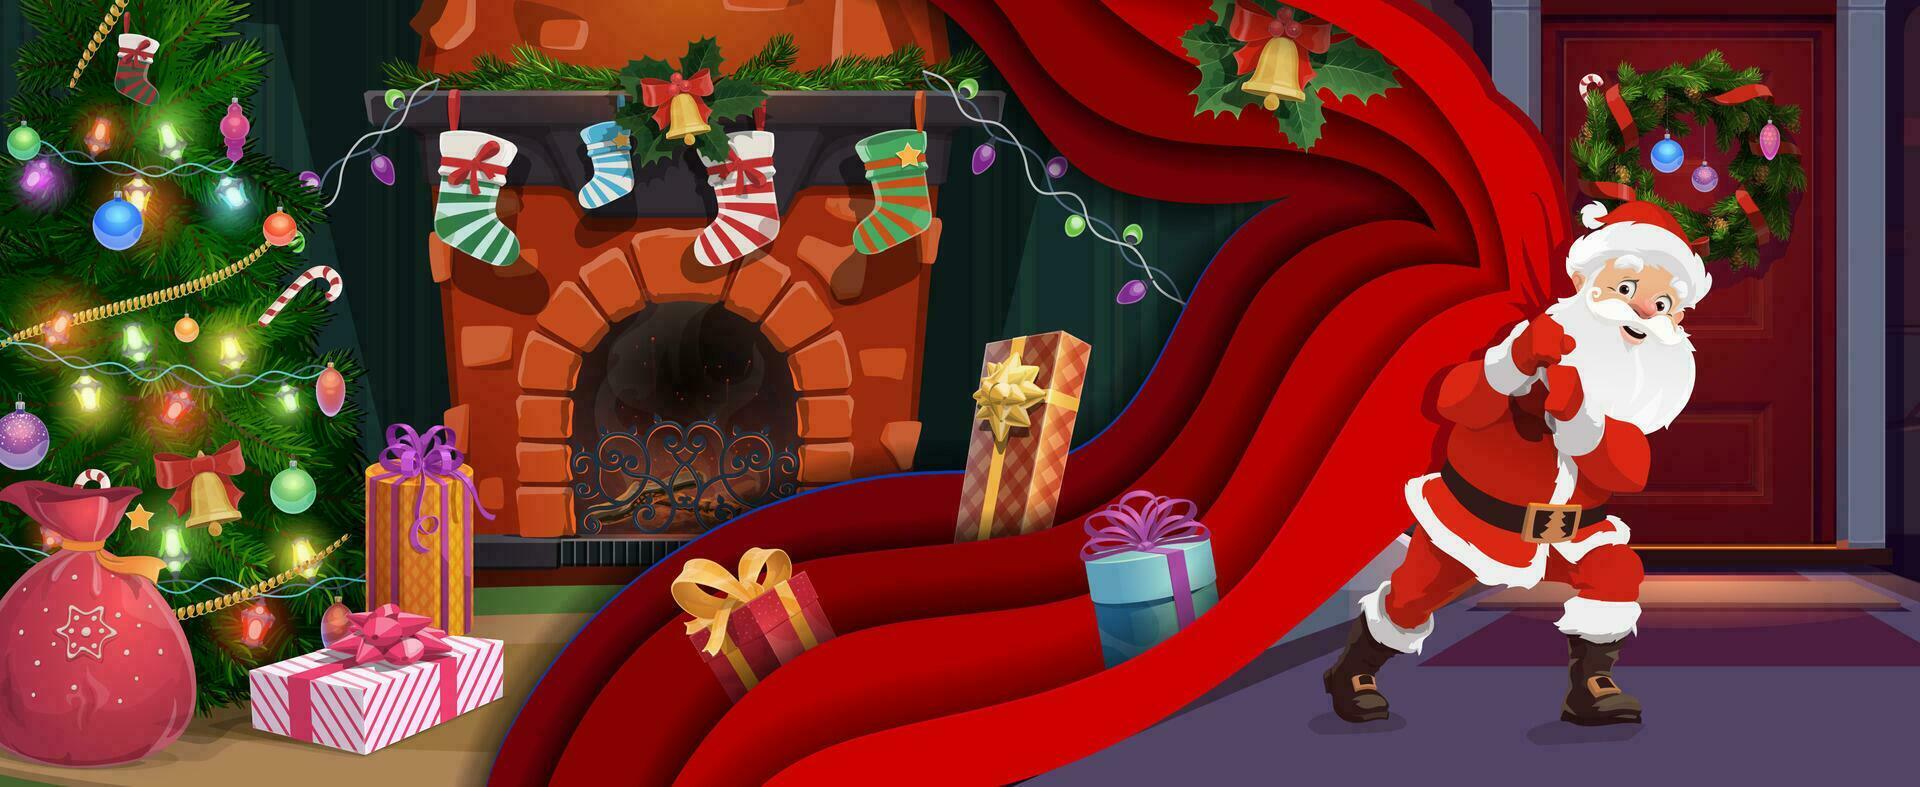 Christmas paper cut banner, fireplace and socks vector